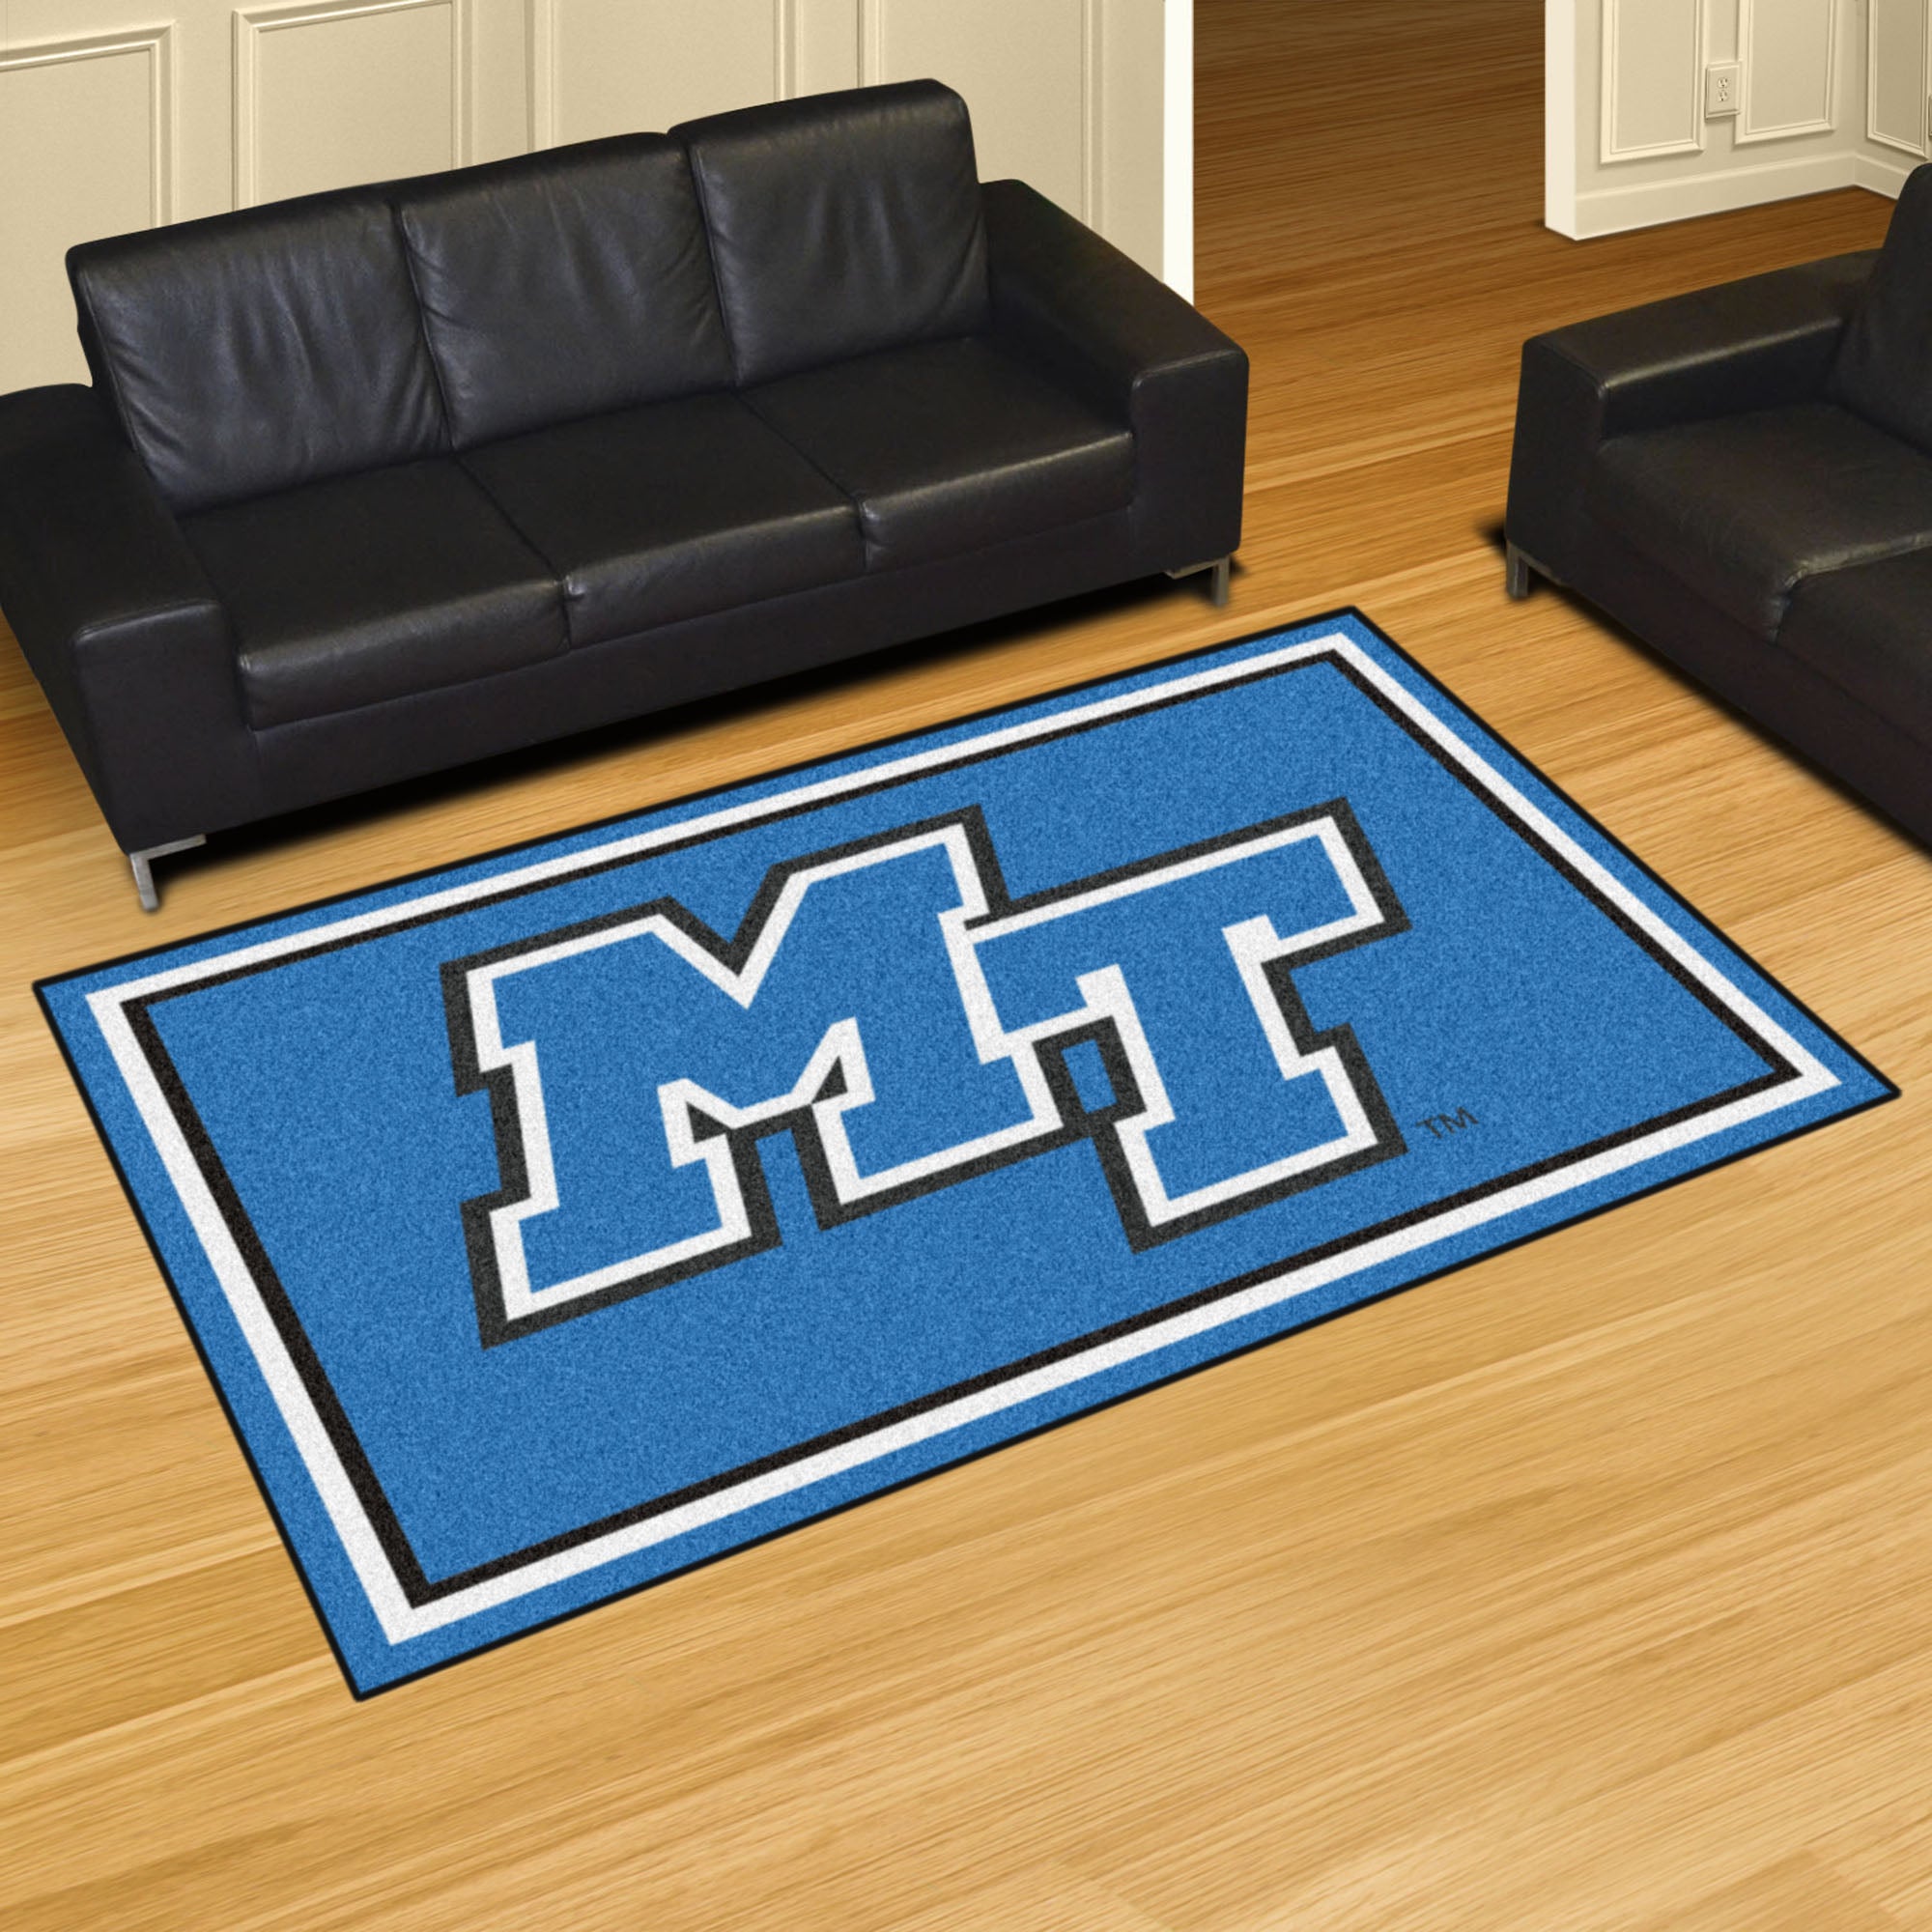 FANMATS, Middle Tennessee State University 5ft. x 8 ft. Plush Area Rug